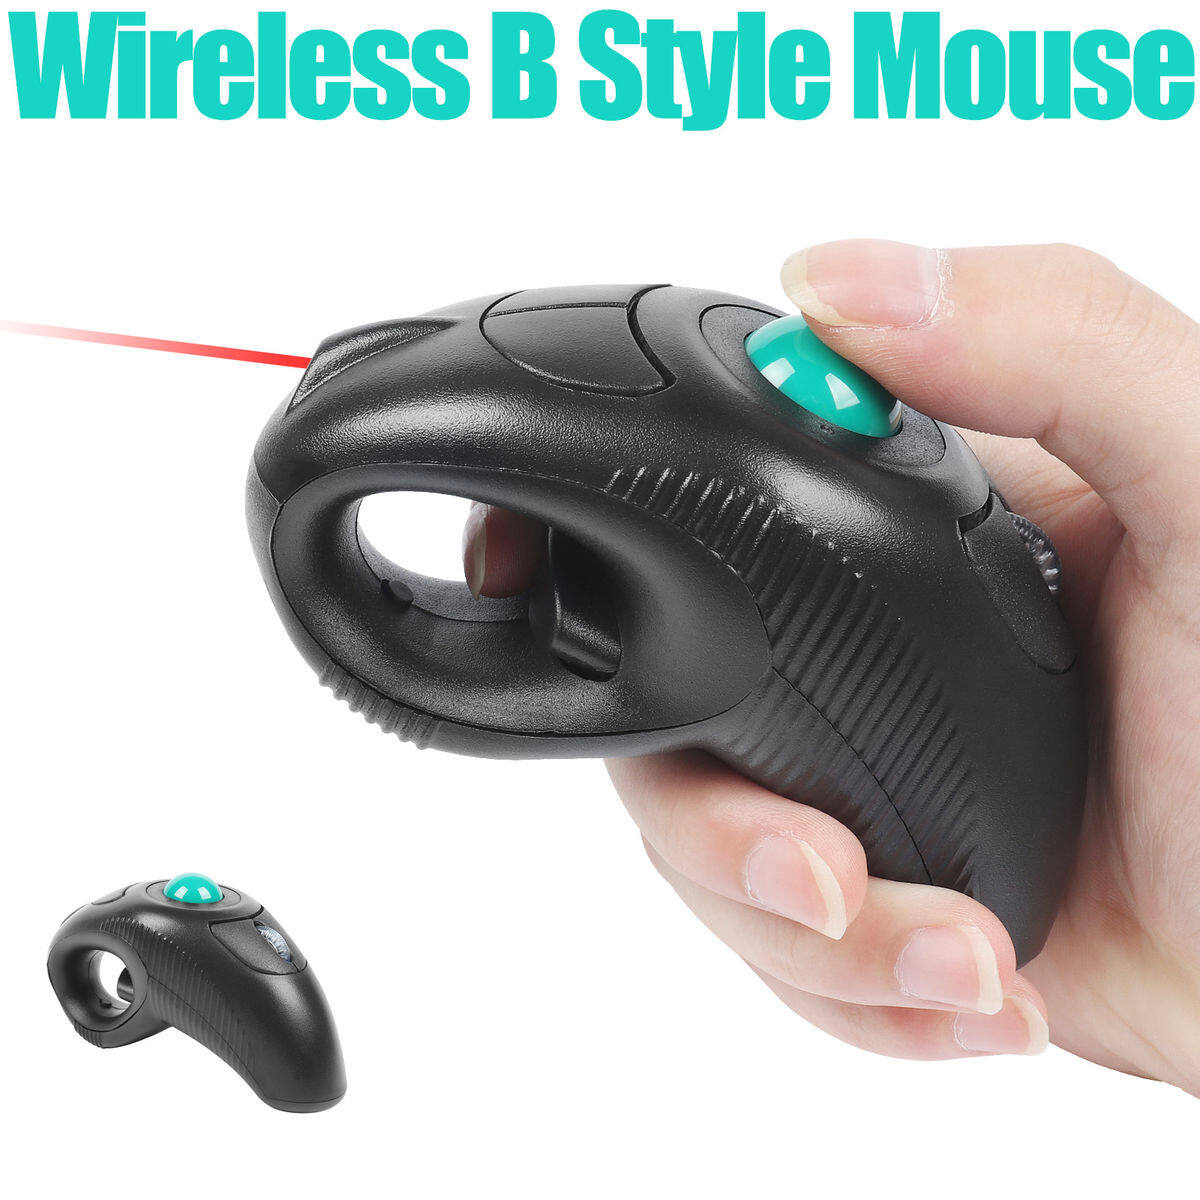 Wireless Trackball Mouse Vertical 2.4GHz Digital Thumb-Controlled Mause 10M  Distance control Handheld 1600 DPI Track Ball Optical Mice For Office Work